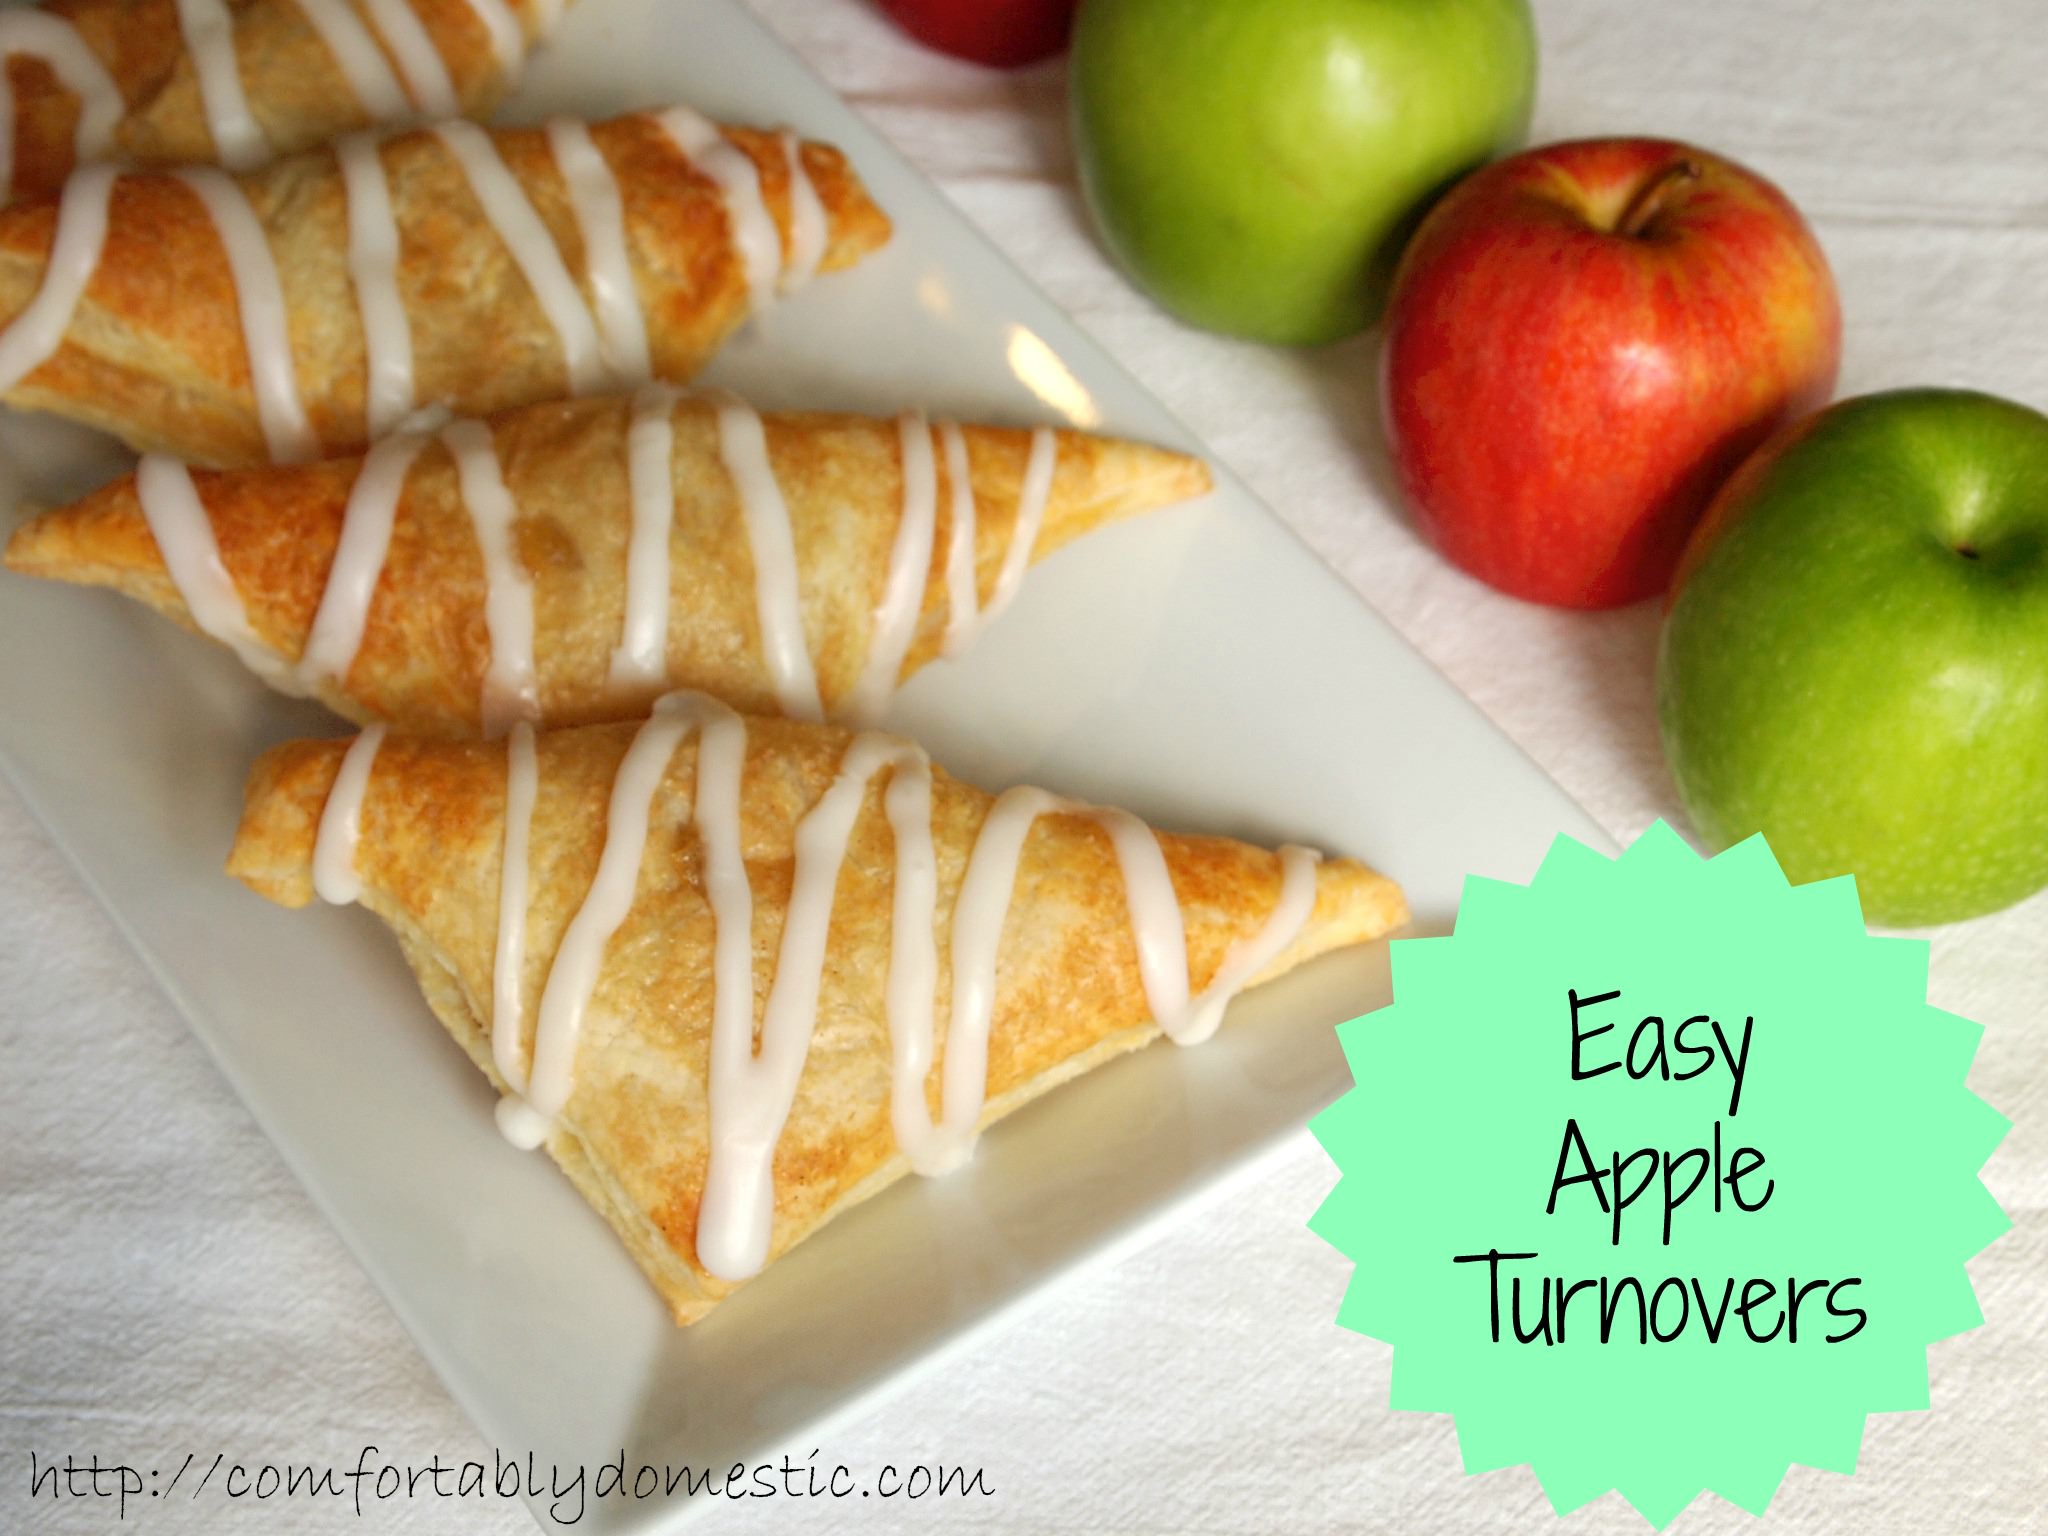 Apple turnovers are a sweet treat in the morning with a cup of coffee, as an afternoon snack, or for a light dessert. The best part is that they're incredibly easy to make! | ComfortablyDomestic.com